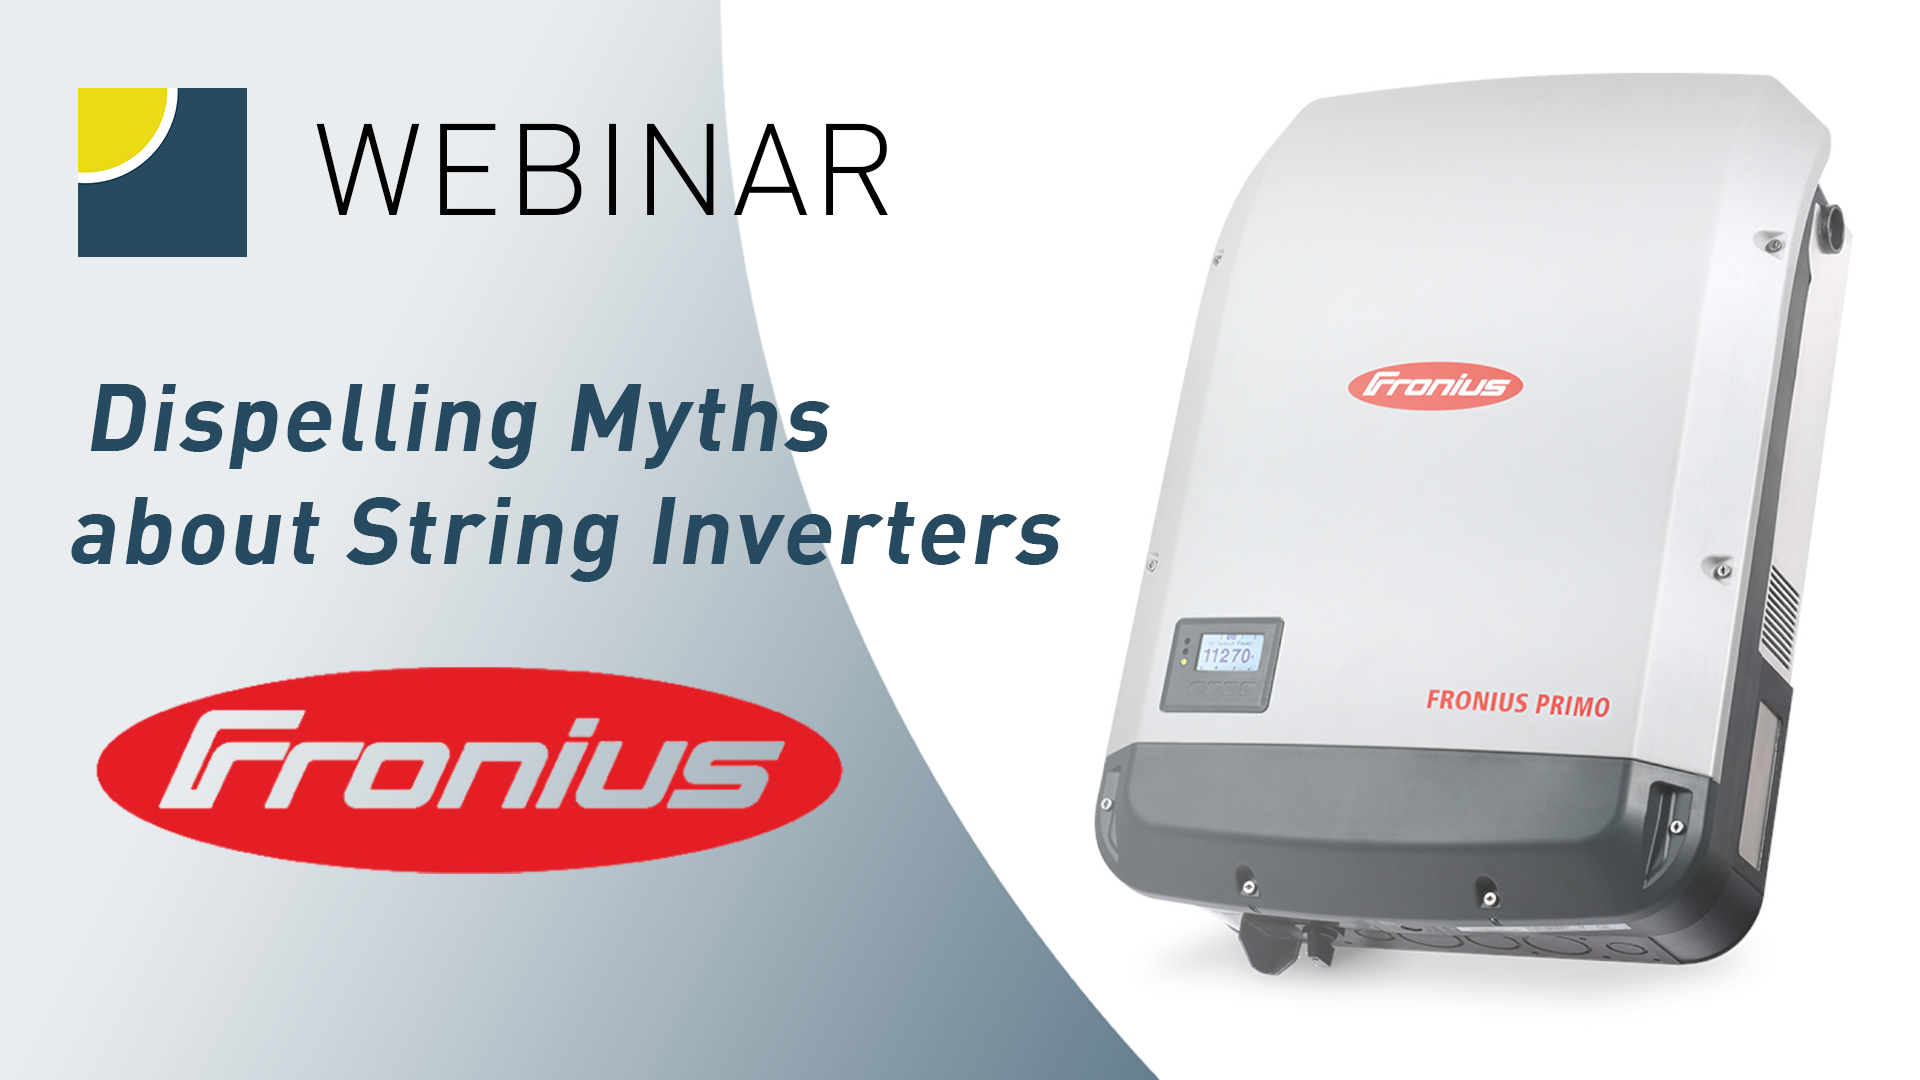 Dispelling Myths about String Inverters